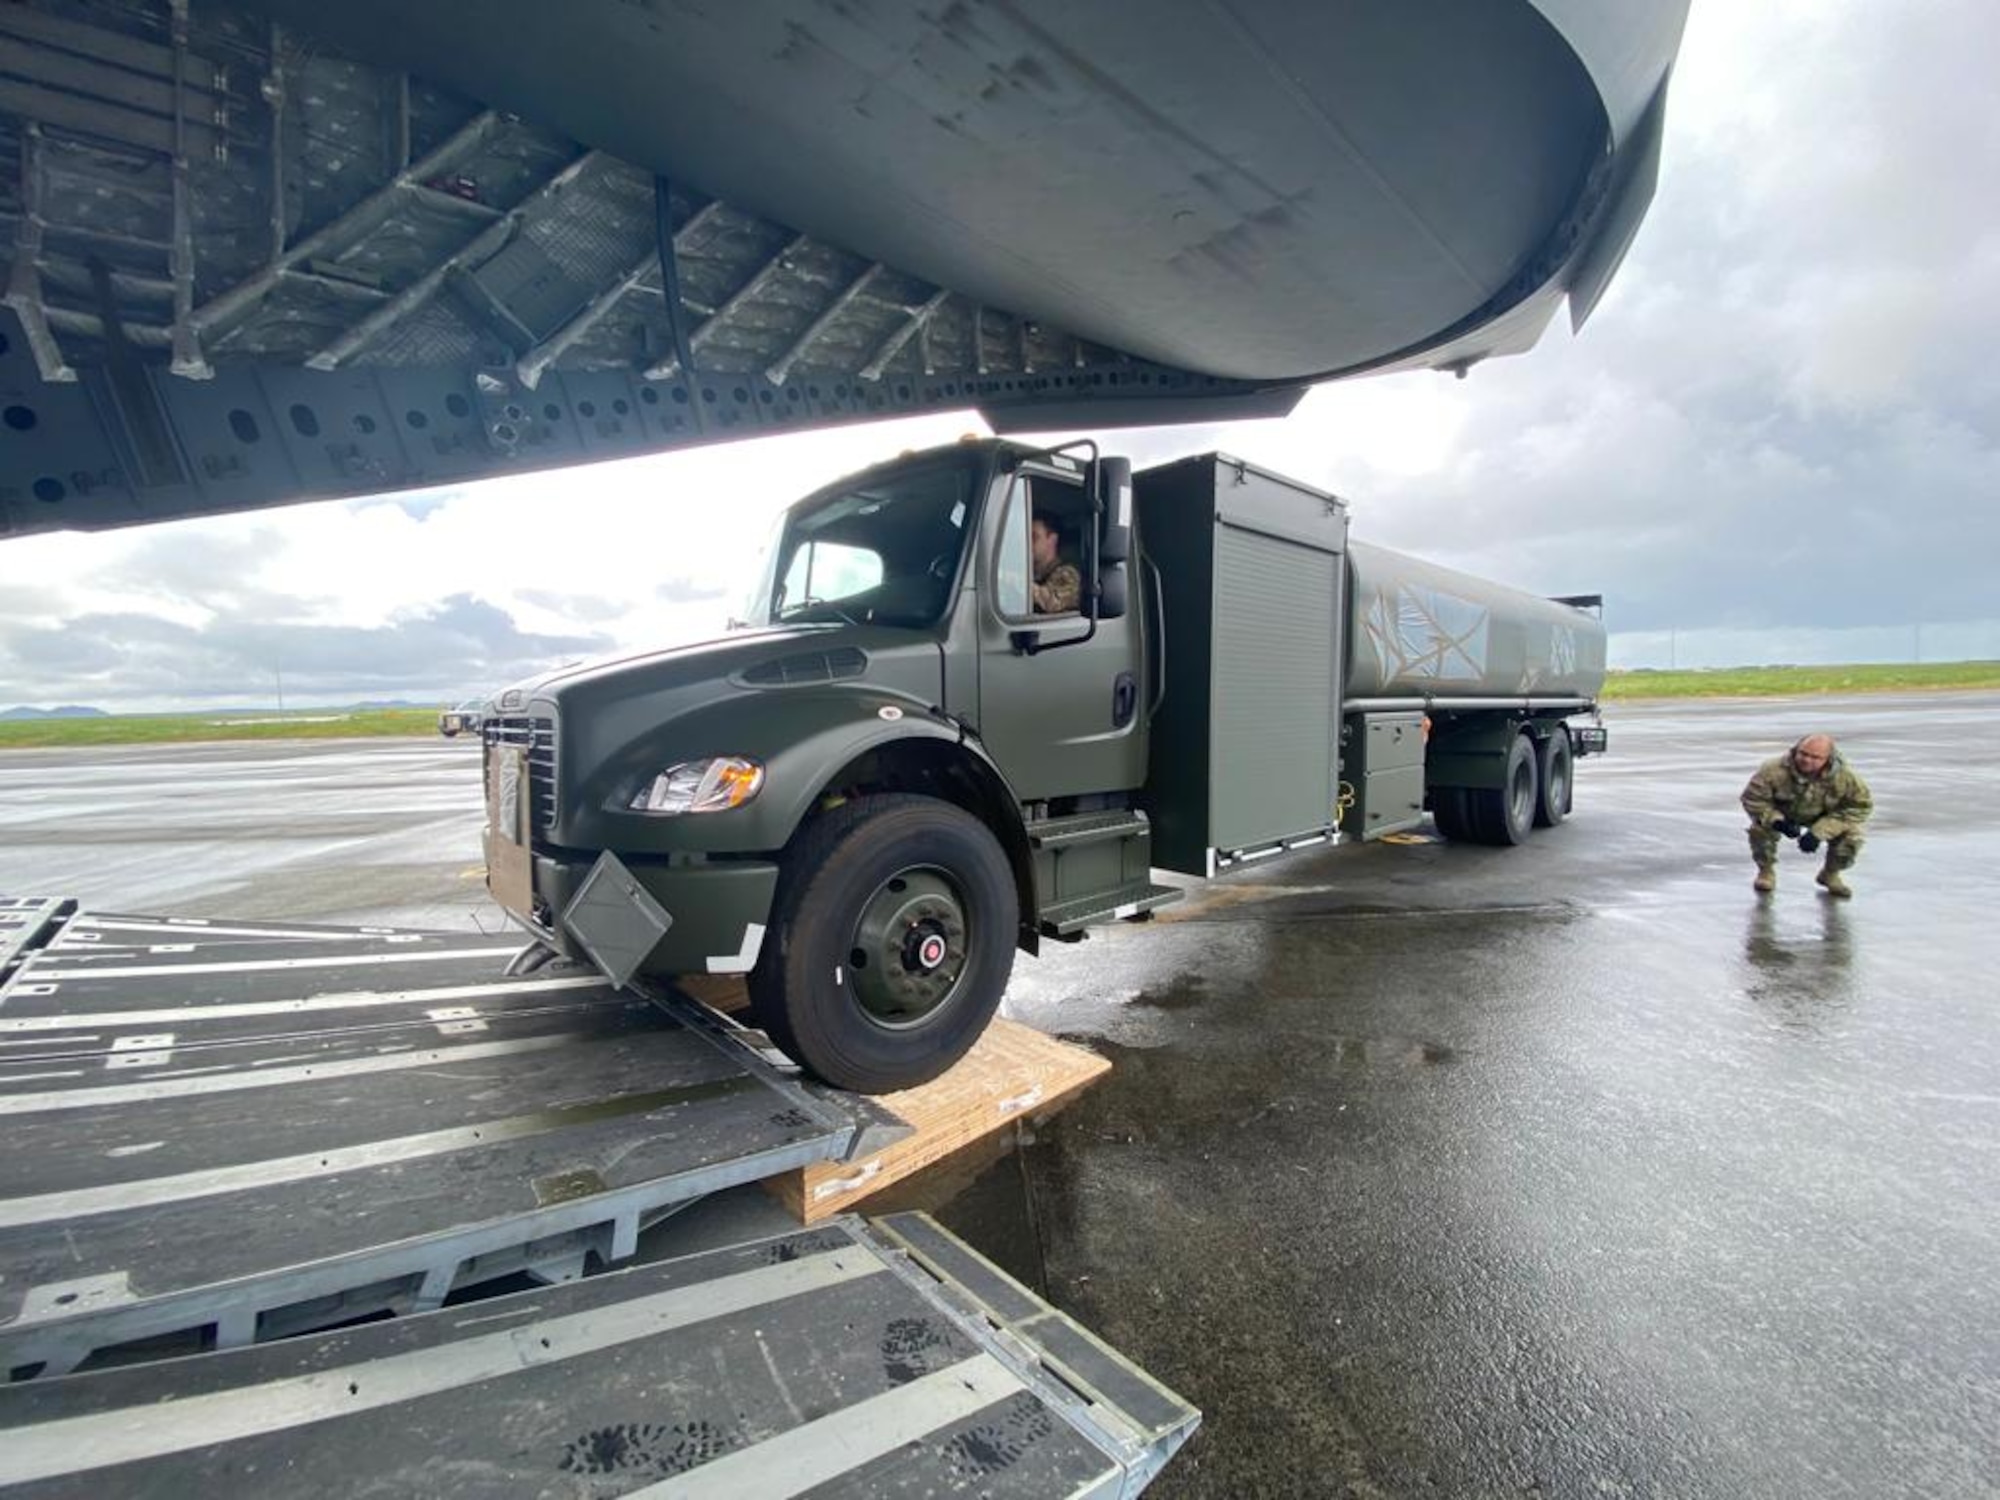 A truck is downloaded from an aircraft.